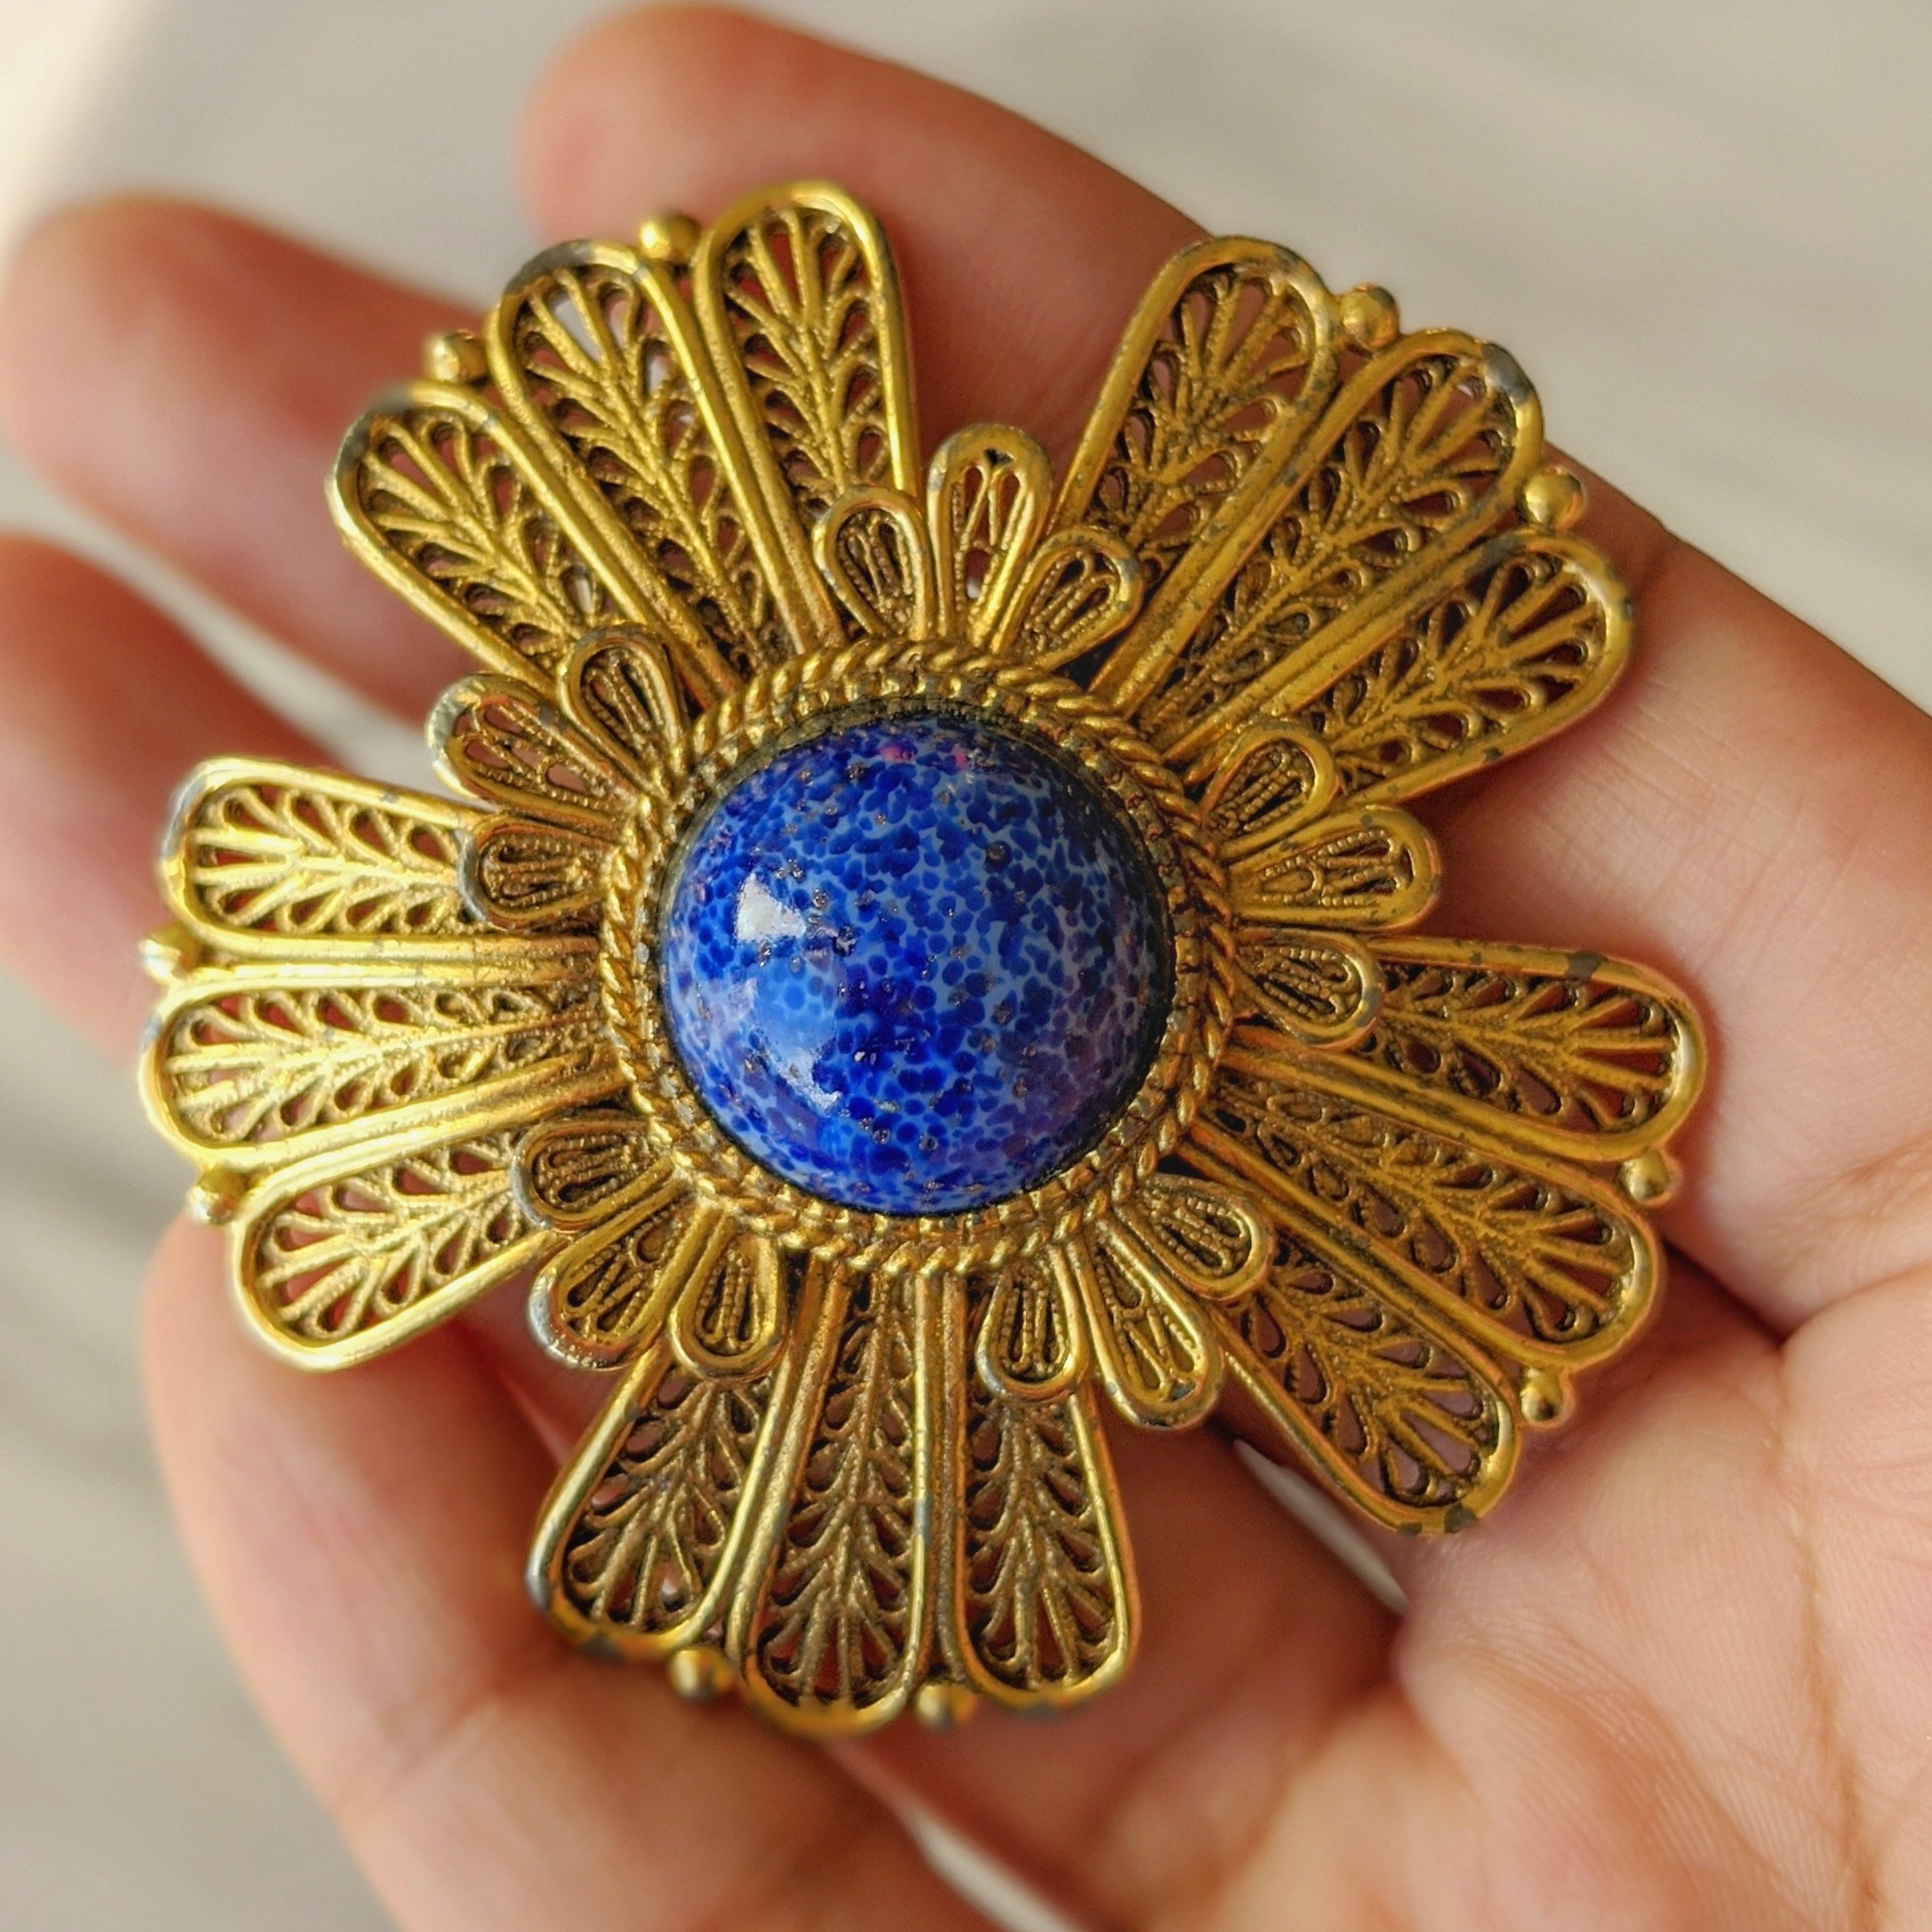 The 1960s costume Lapis Lazuli designer brooch in a woman's hand